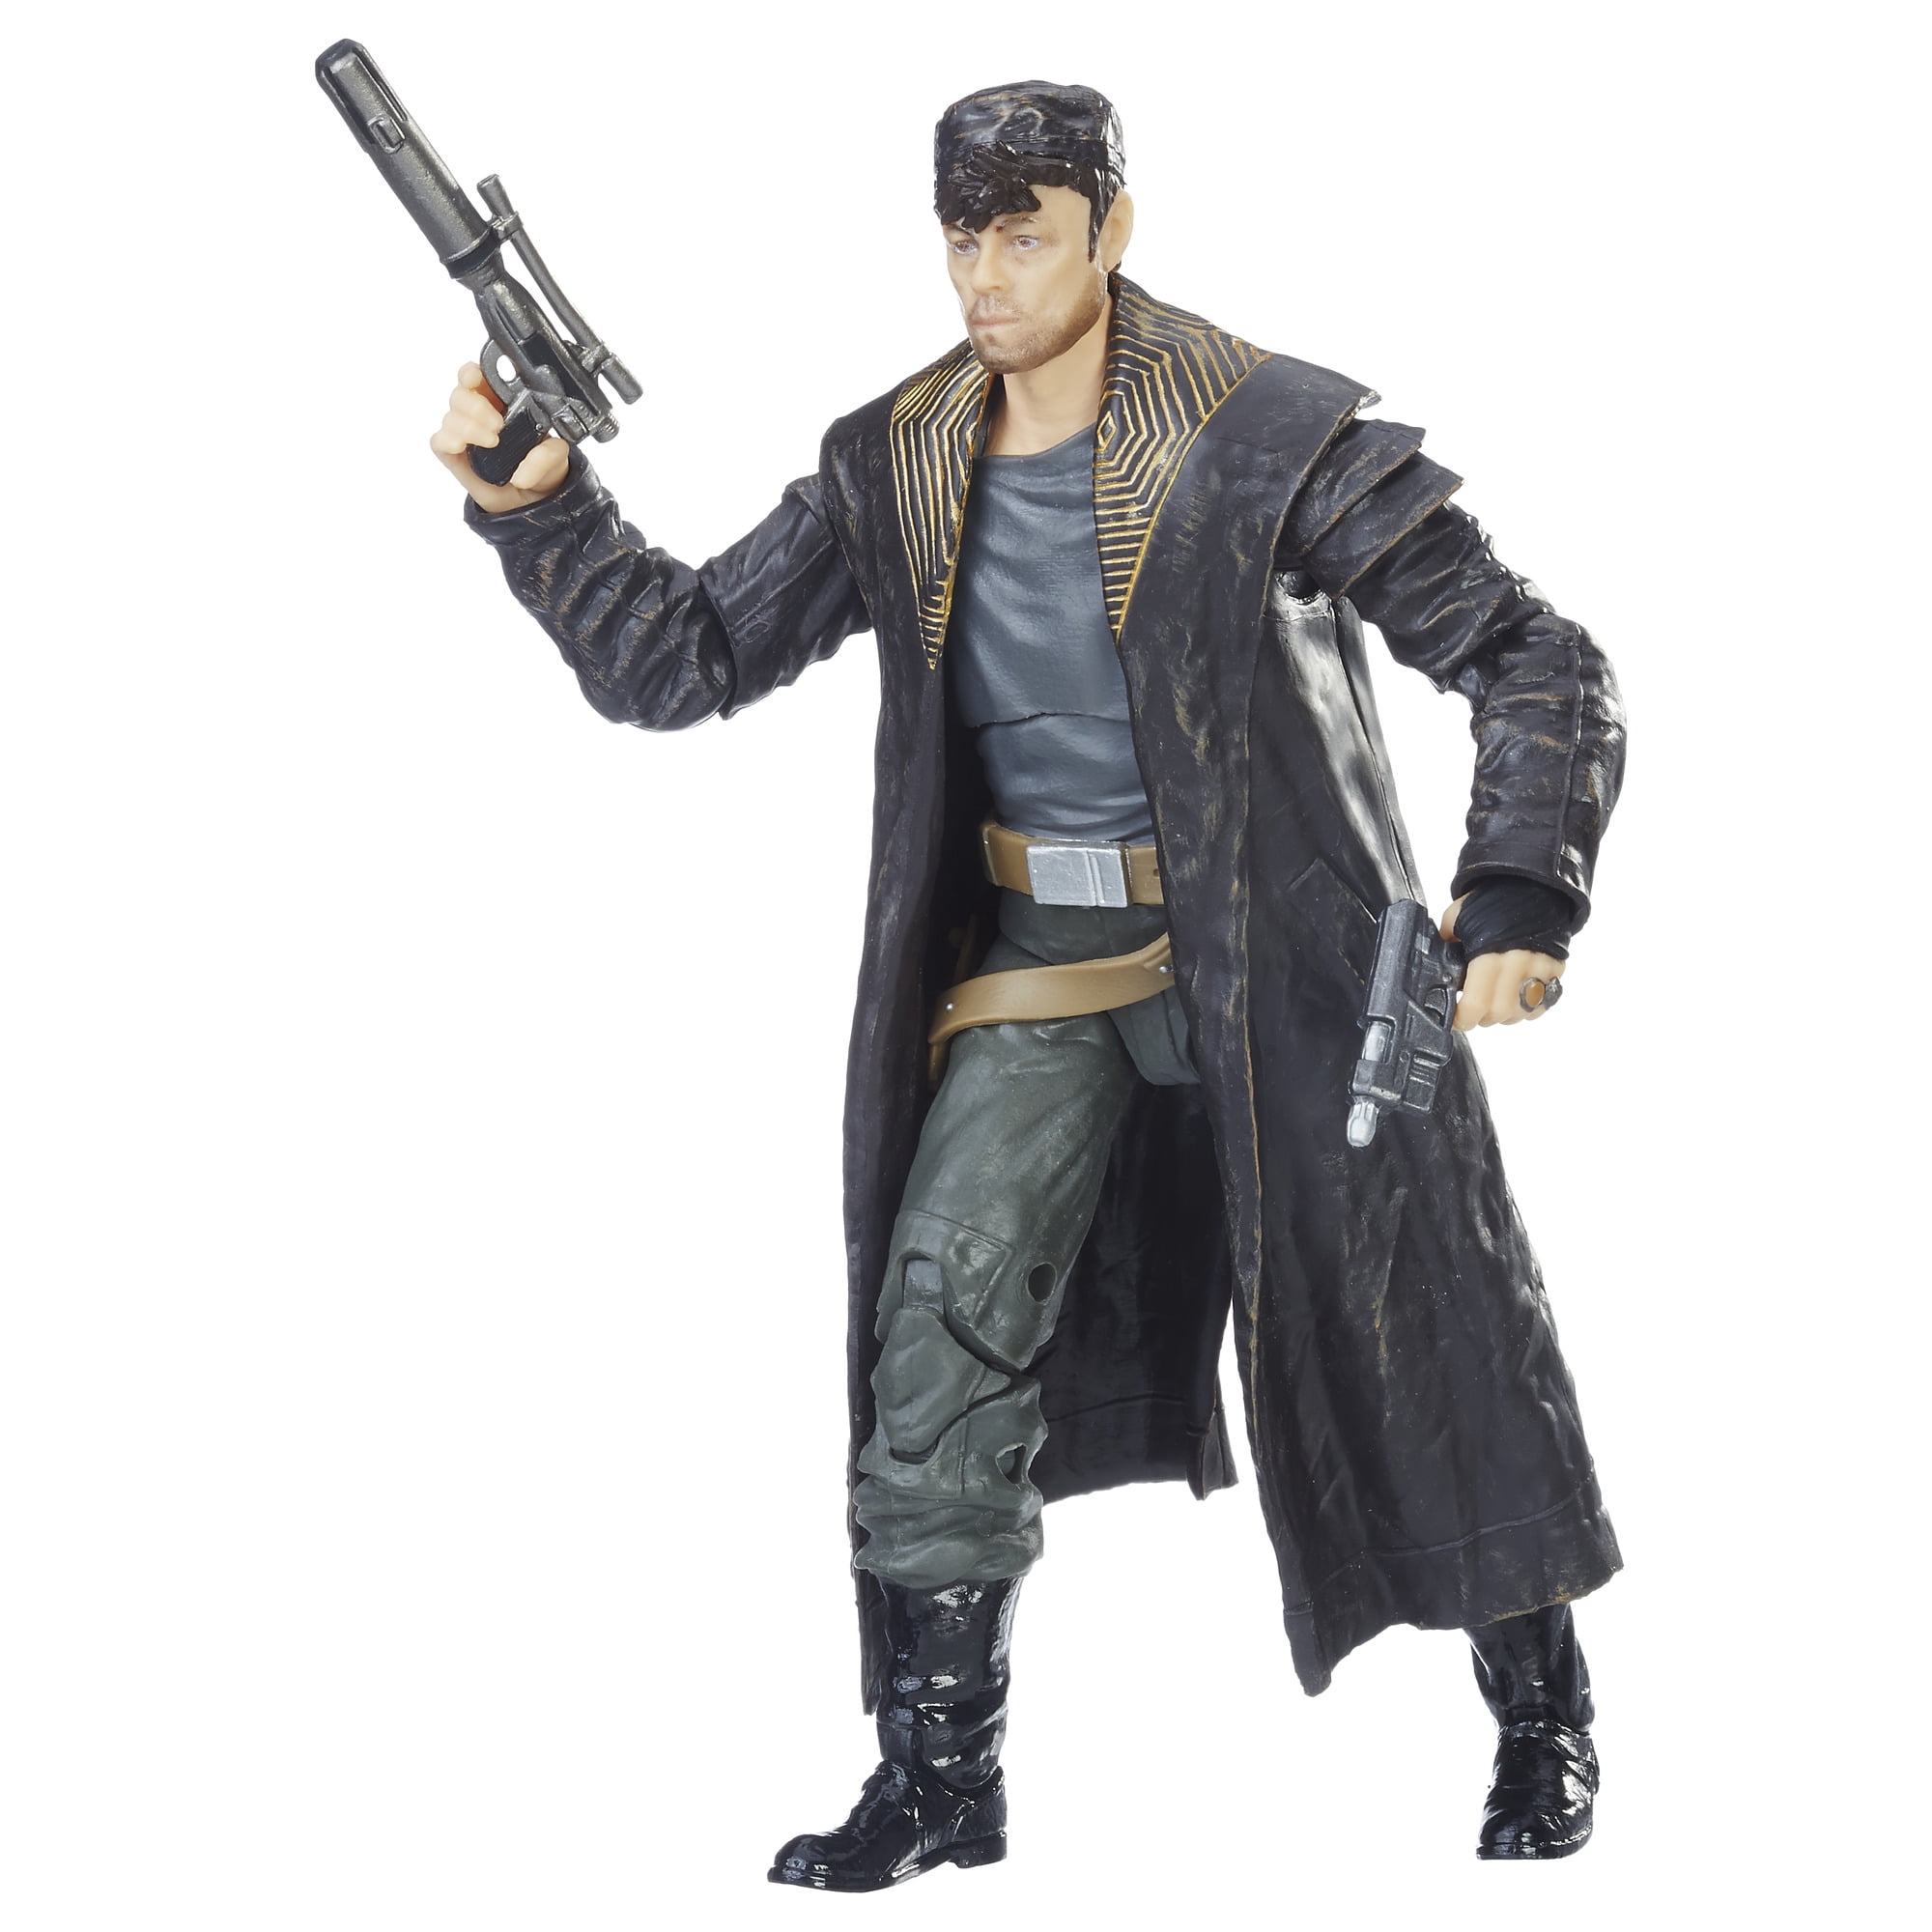 Canto Bight Hasbro Star Wars The Black Series DJ Action Figure for sale online